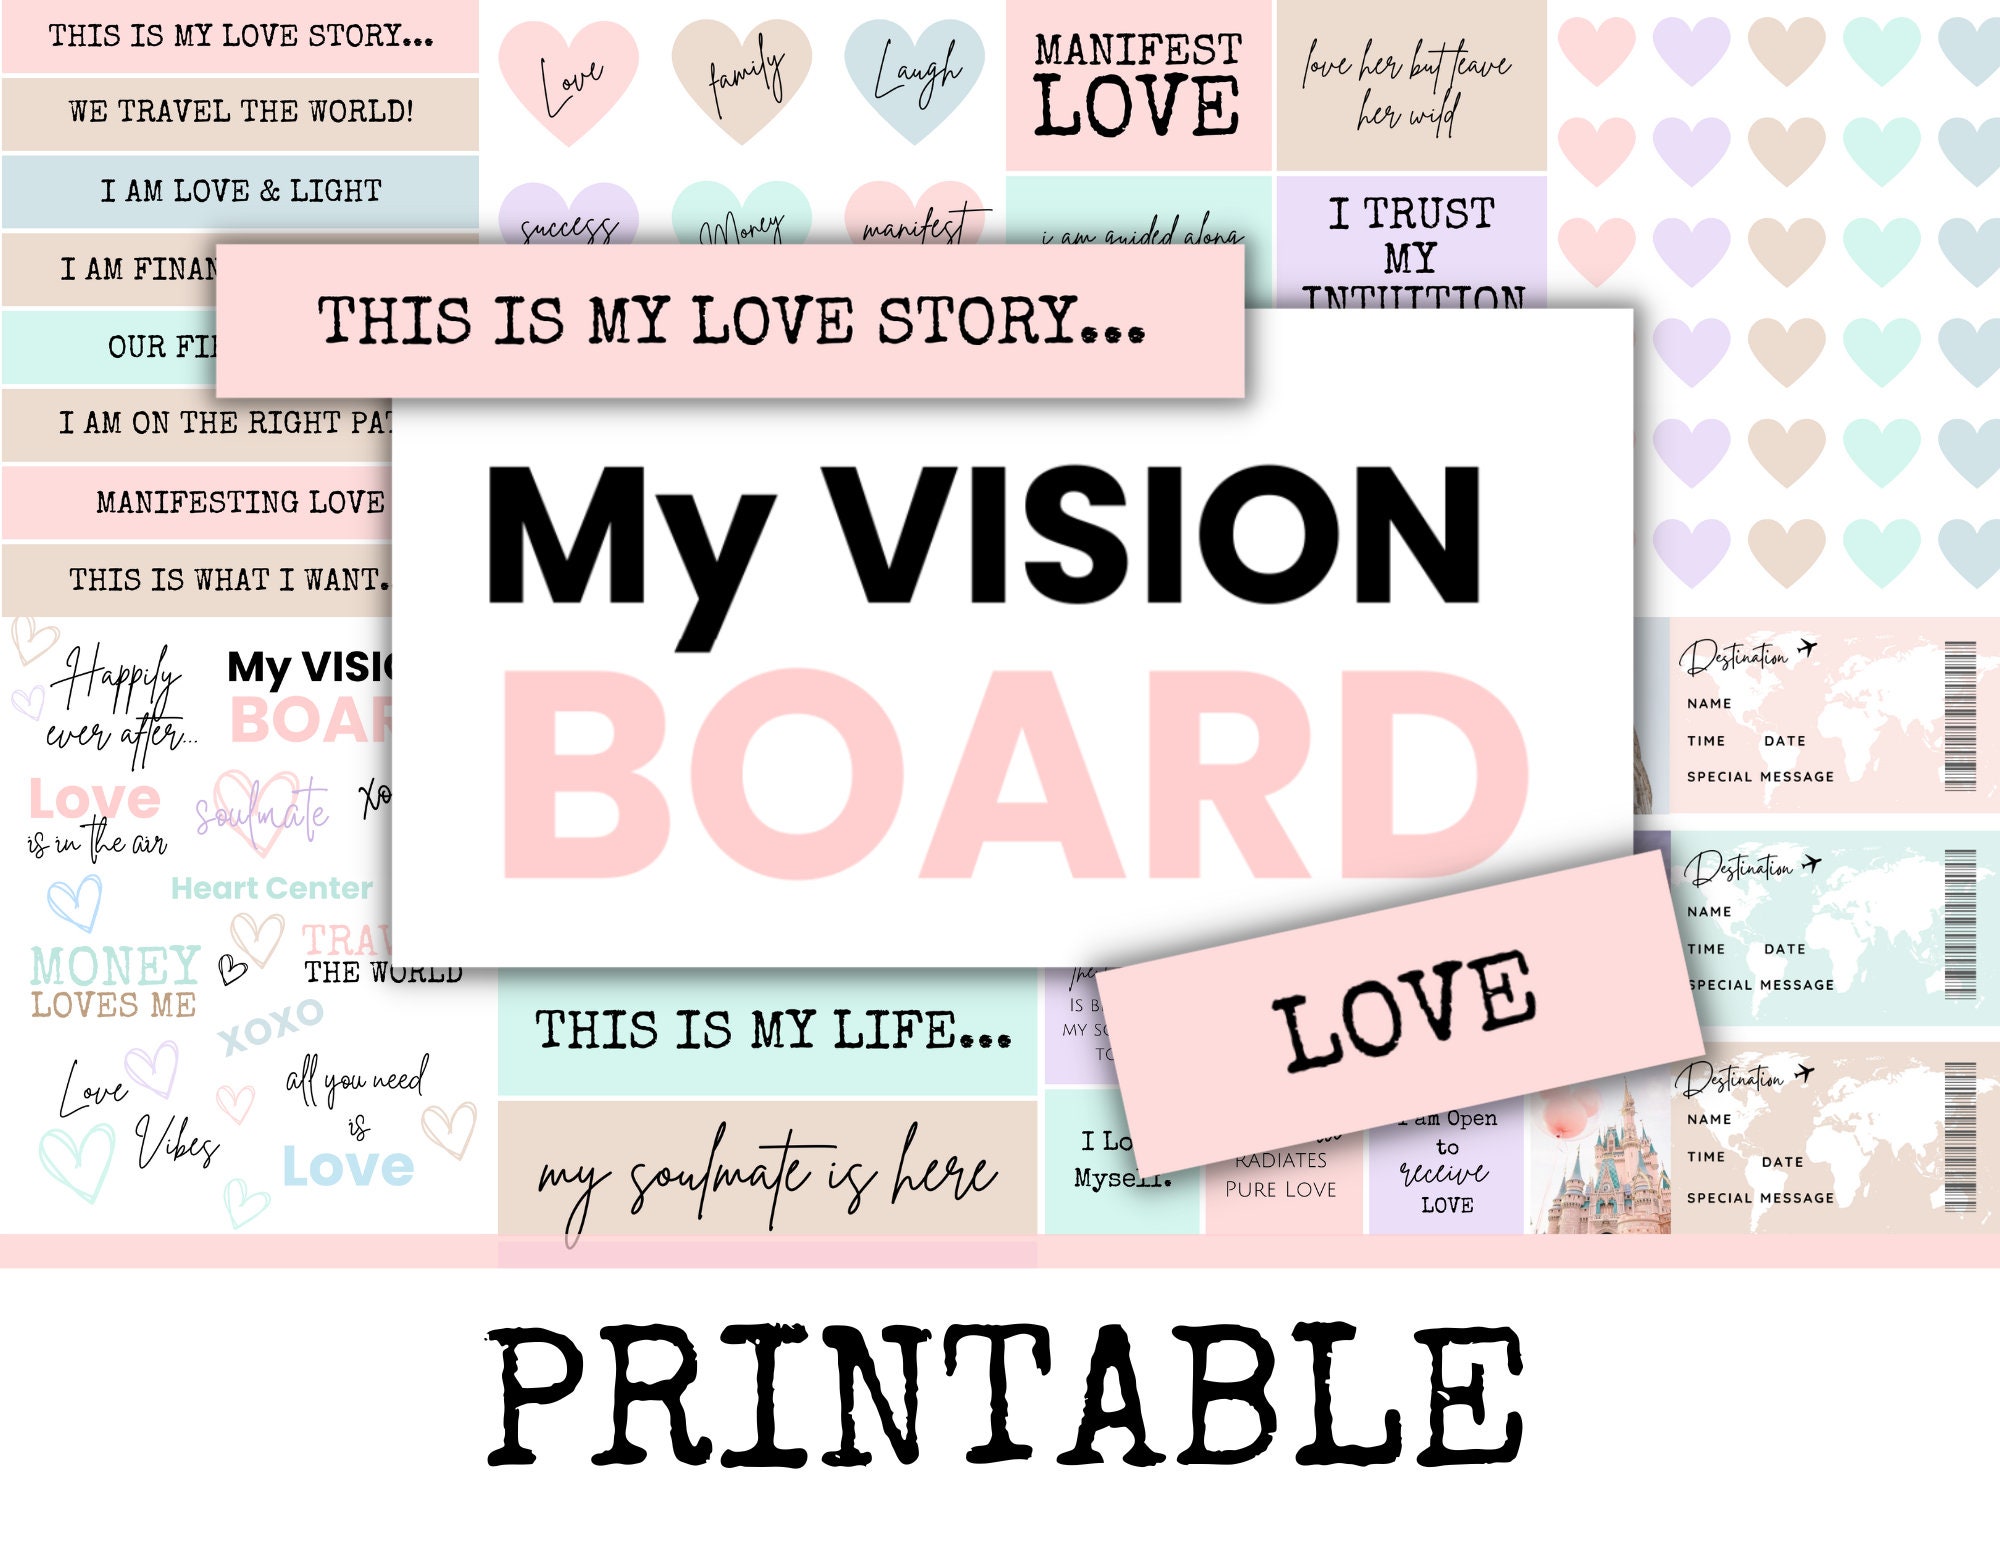 Vision Board Book: 700+ Collection of Inspiring Images and Words to  Visualize, Create, and Manifest Goals - Magazine for Clip Art Collages and